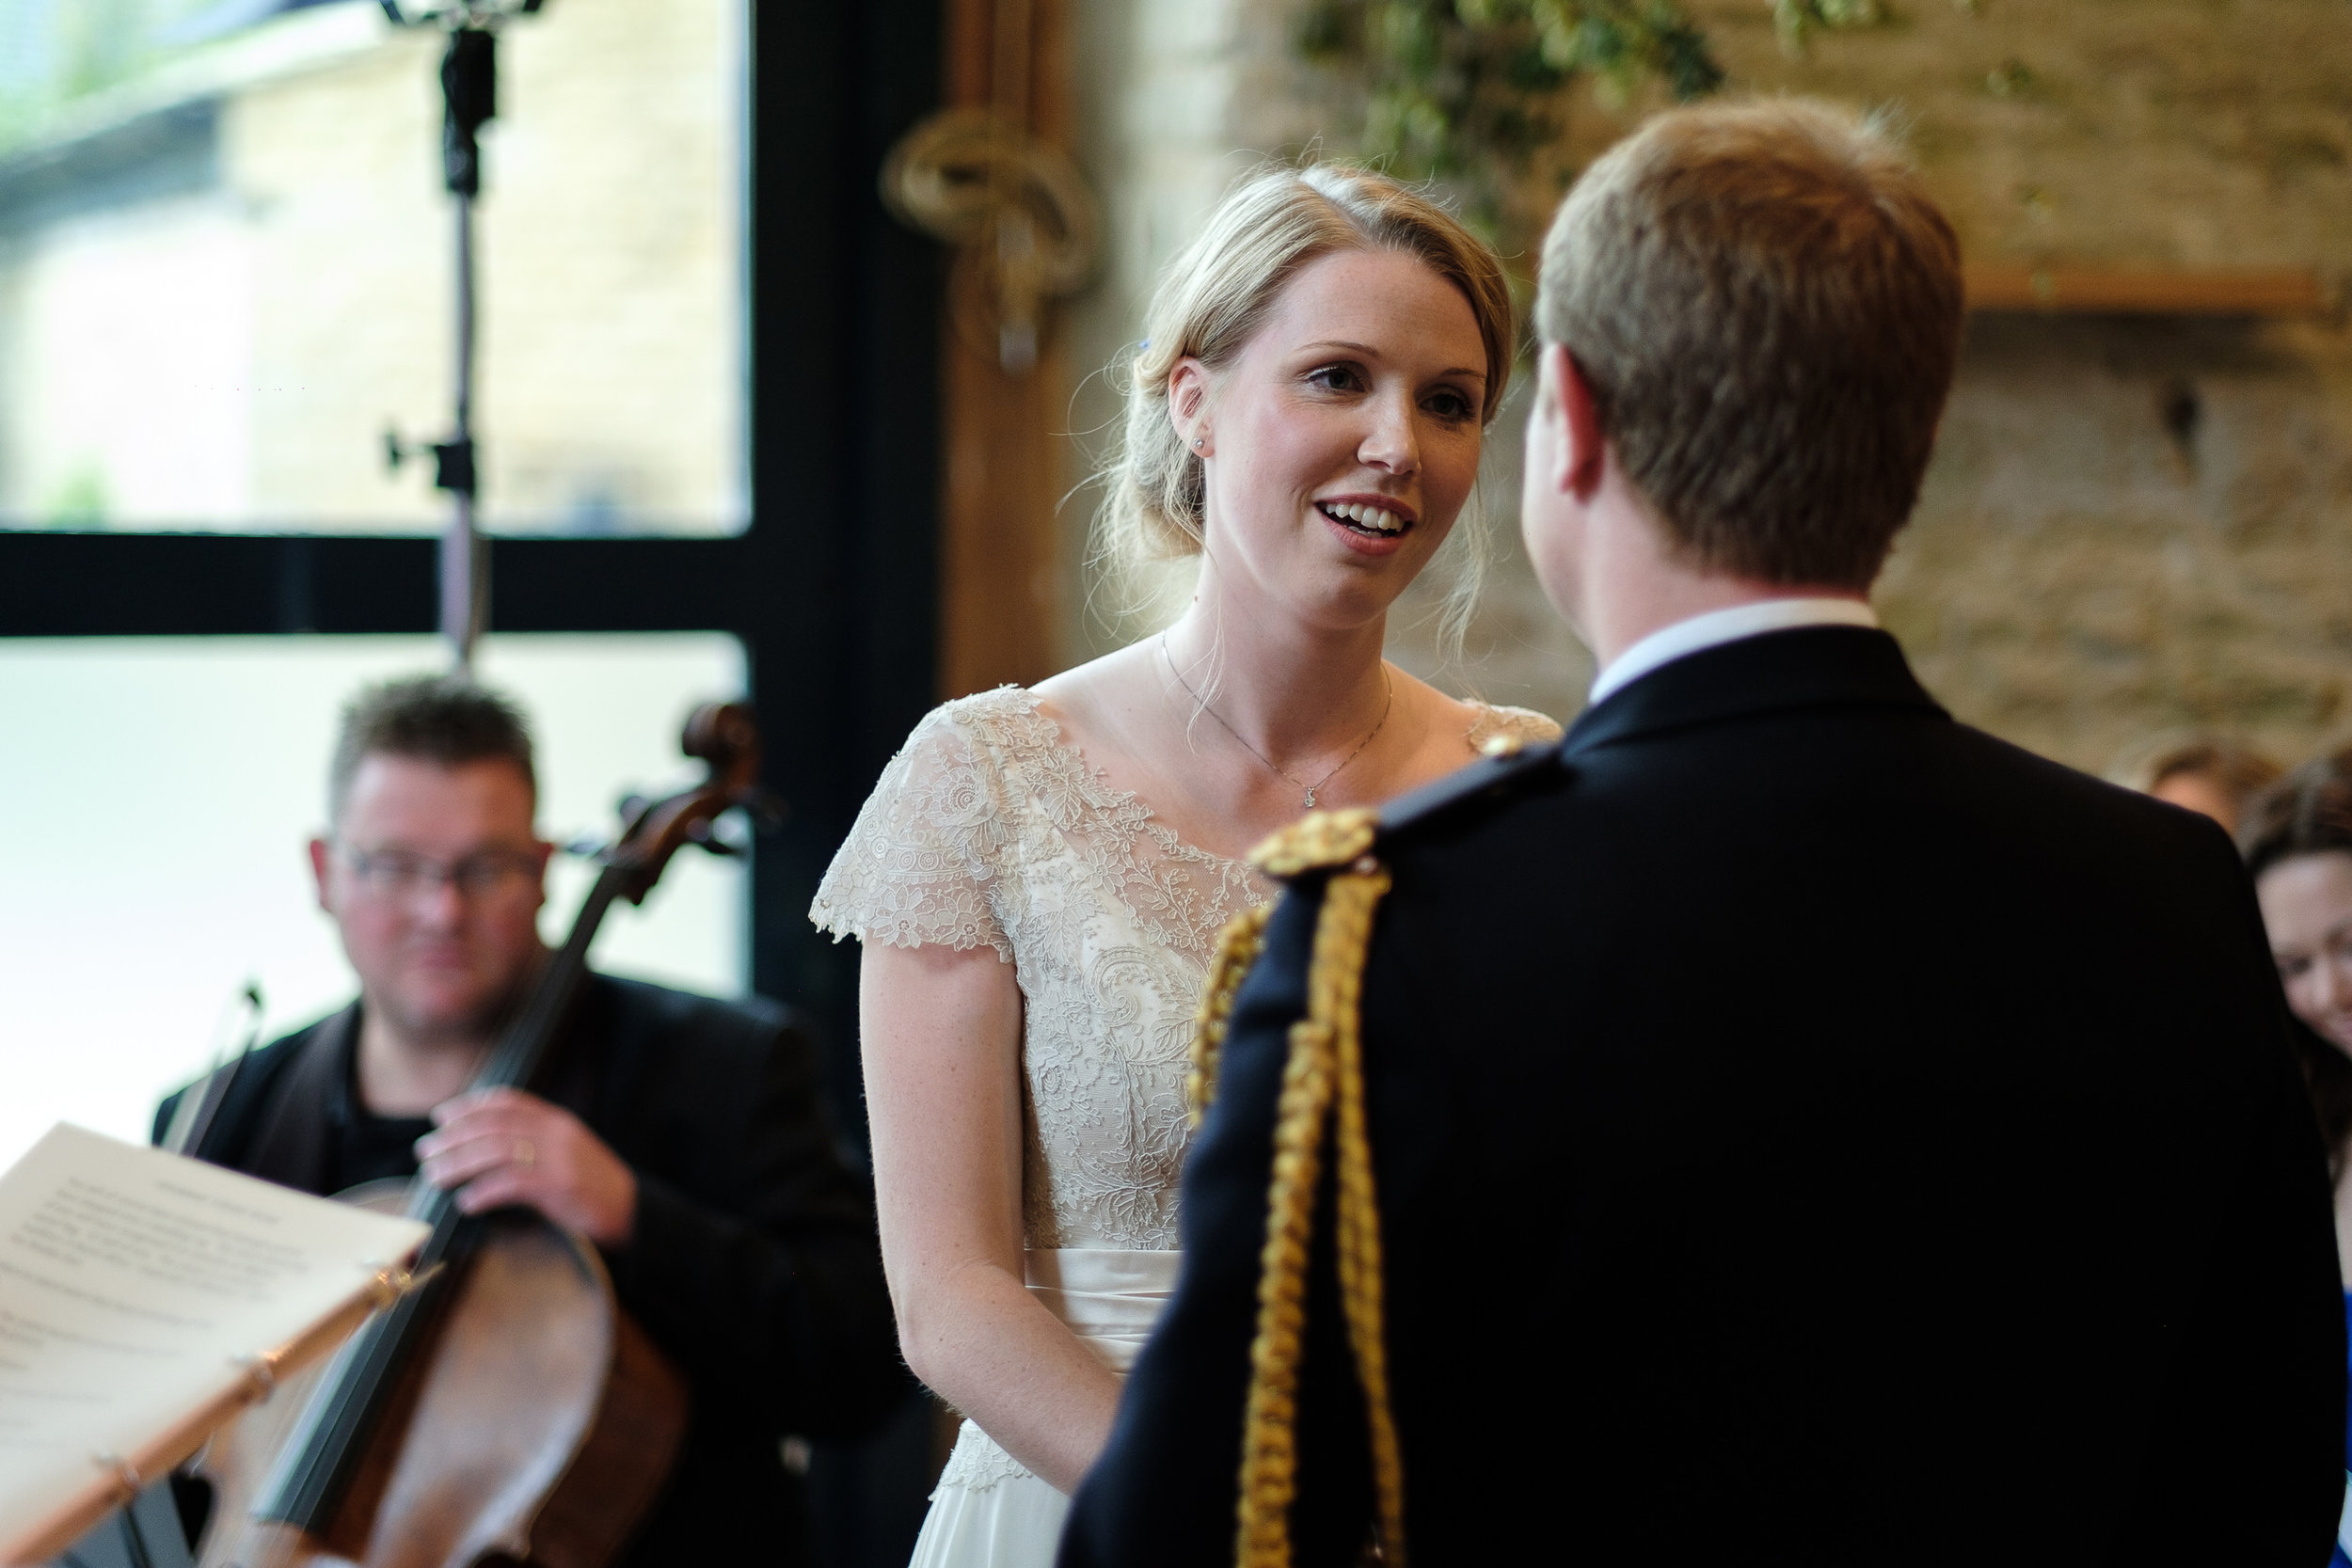 A bride saying her vows at Merriscourt Wedding Venue, Oxfordshire